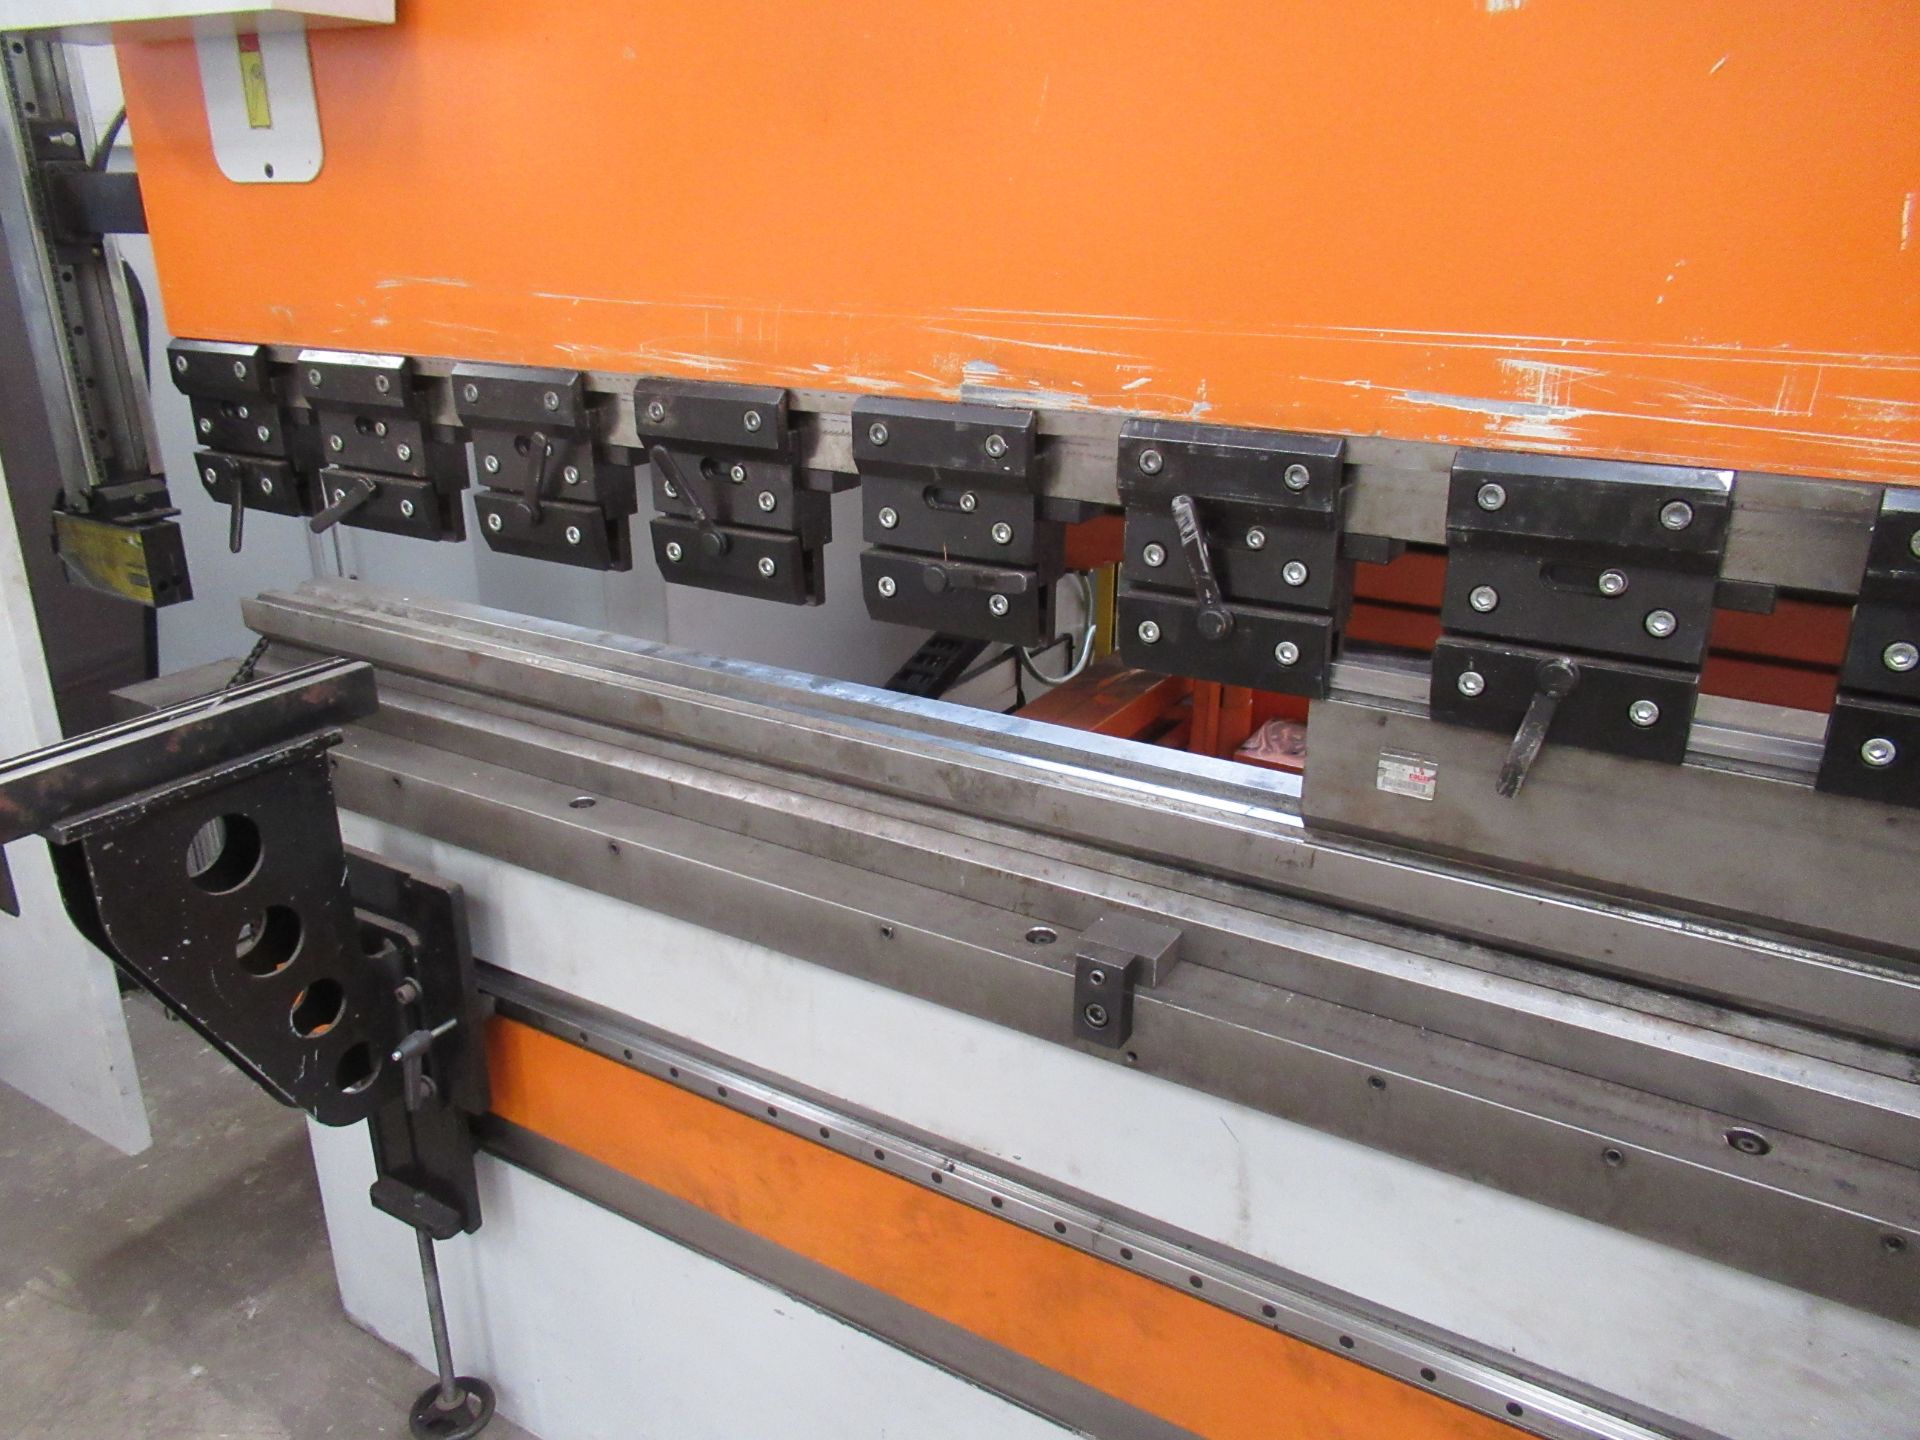 Ermaksan Speed-bend Pro 4100 x 220 CNC Hydraulic Press Brake and a selection of tooling for press br - Image 11 of 16